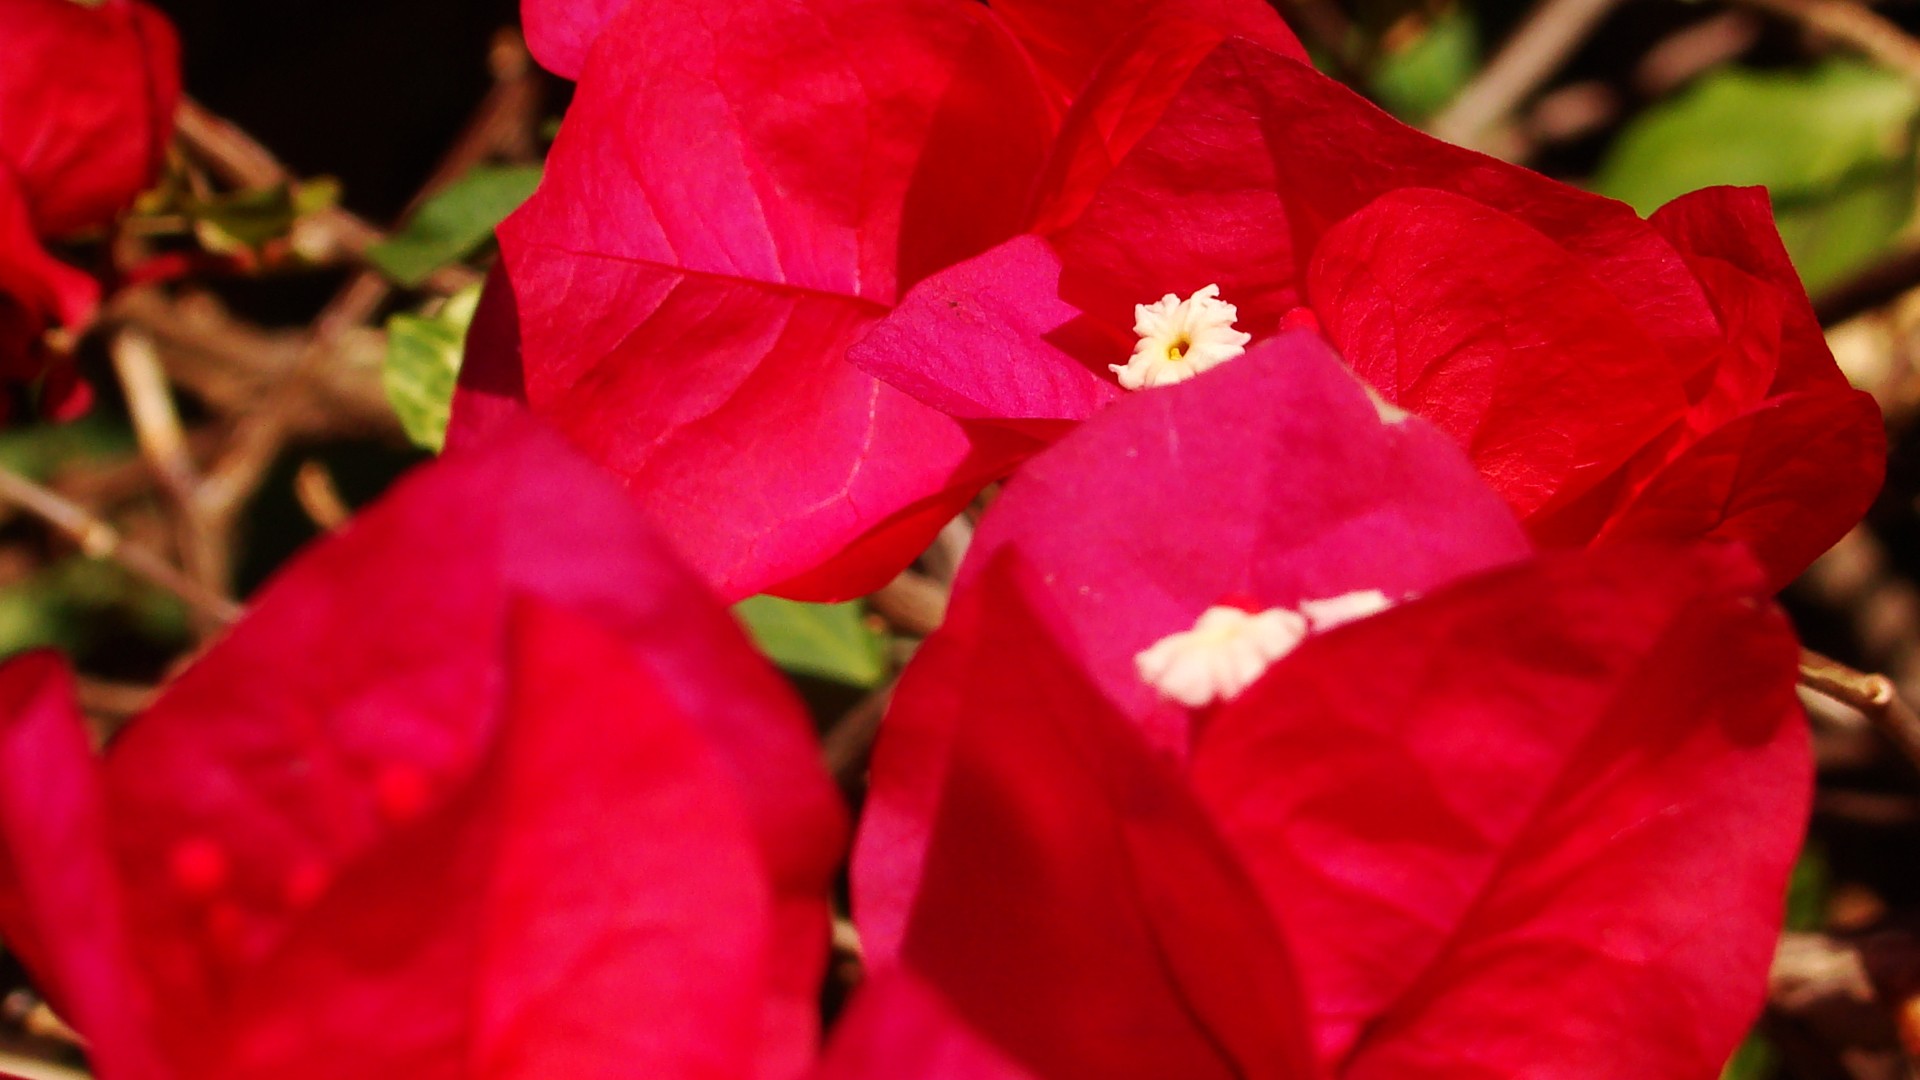 General 1920x1080 plants flowers colorful bougainvillea red flowers